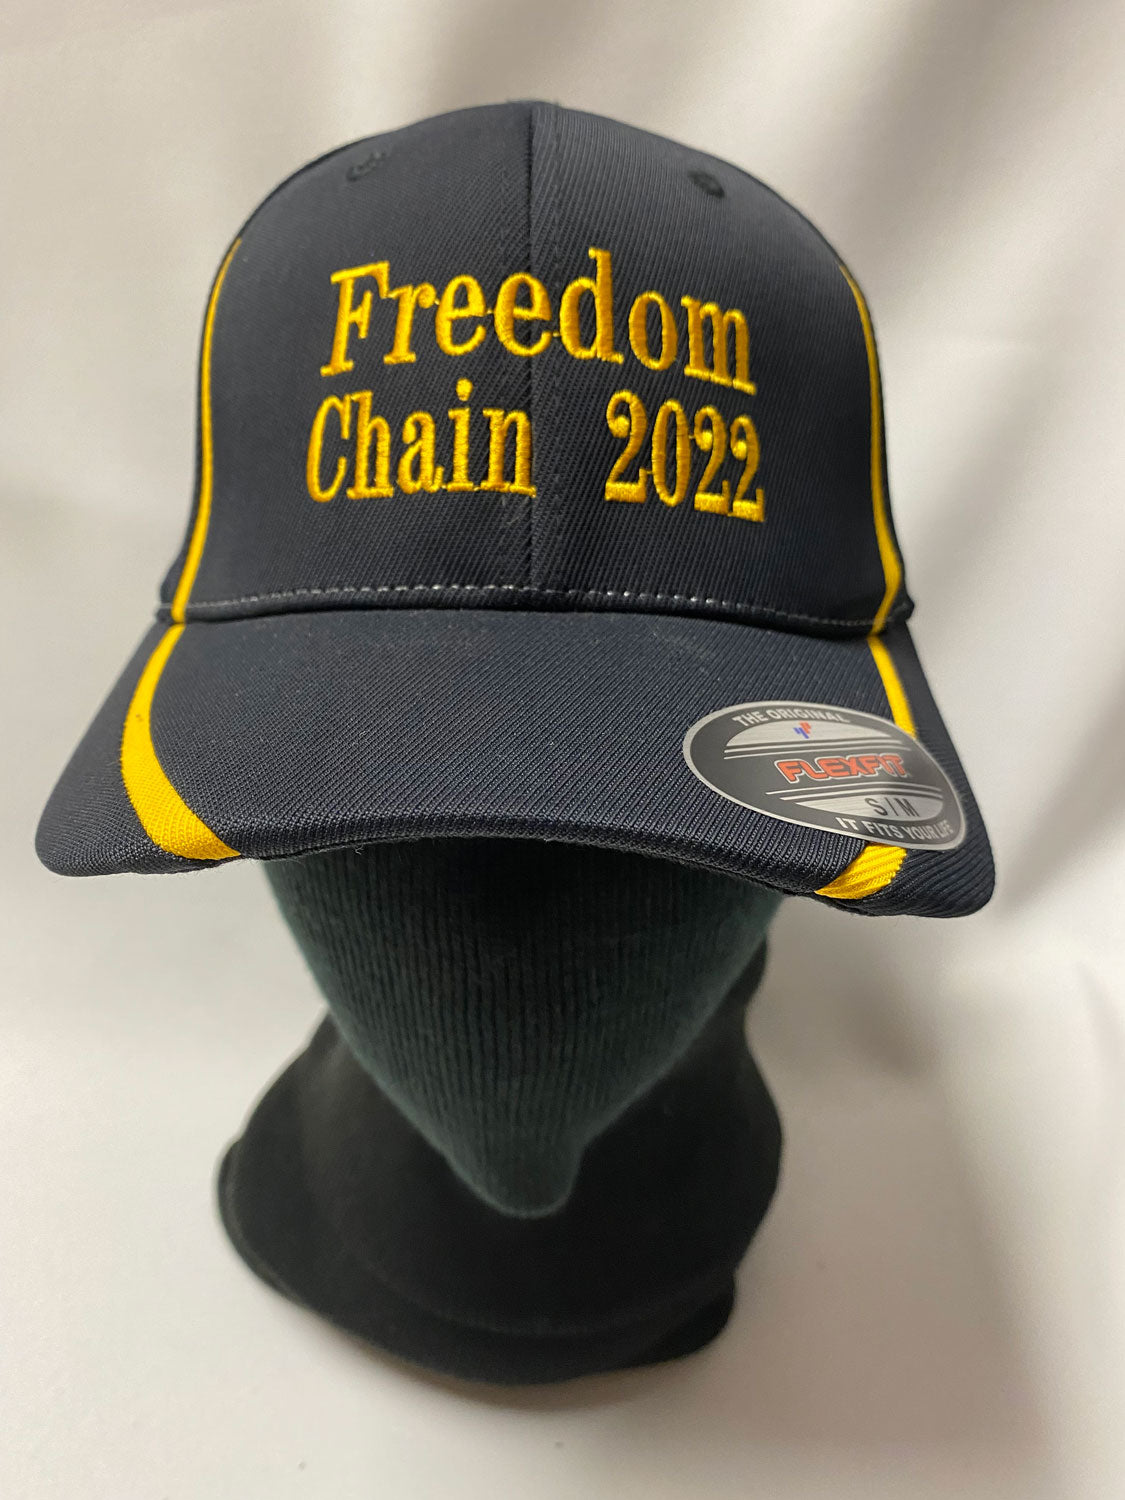 BALL CAP FREEDOM CHAIN 2022 - yellow embroidery on black